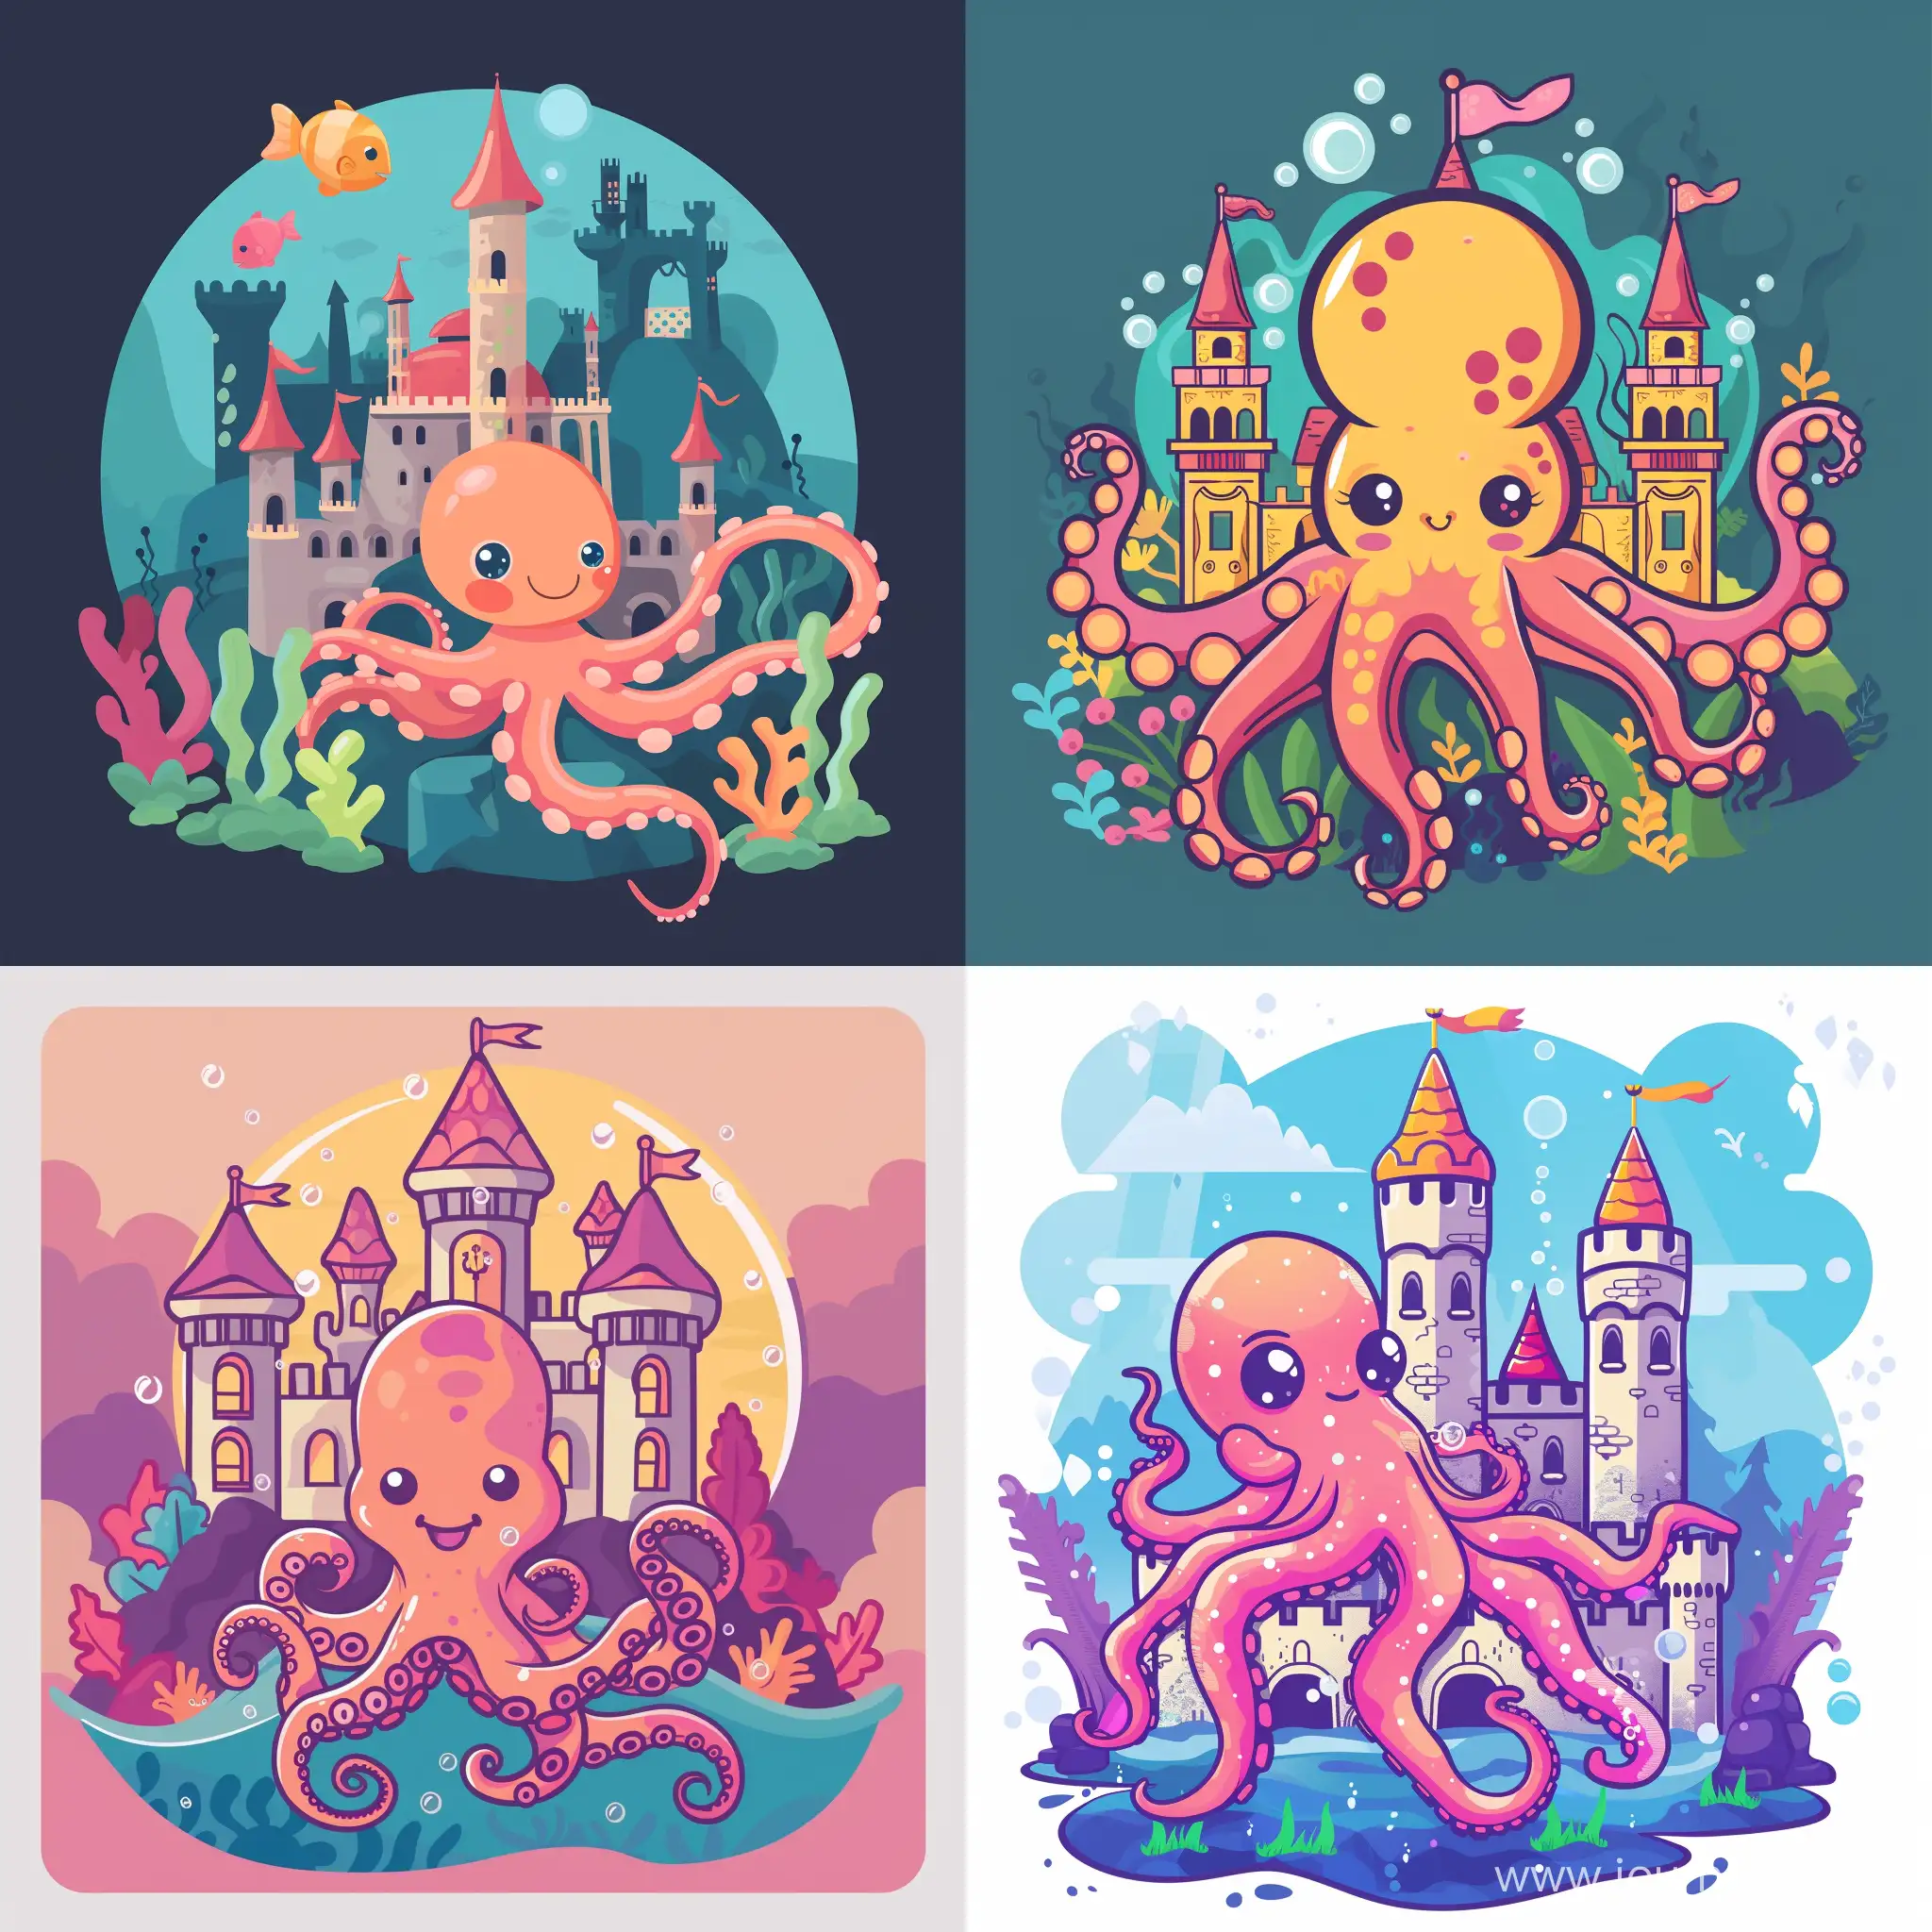 sticker design of cute little octopus at underwater palace, in flat style, high quality details